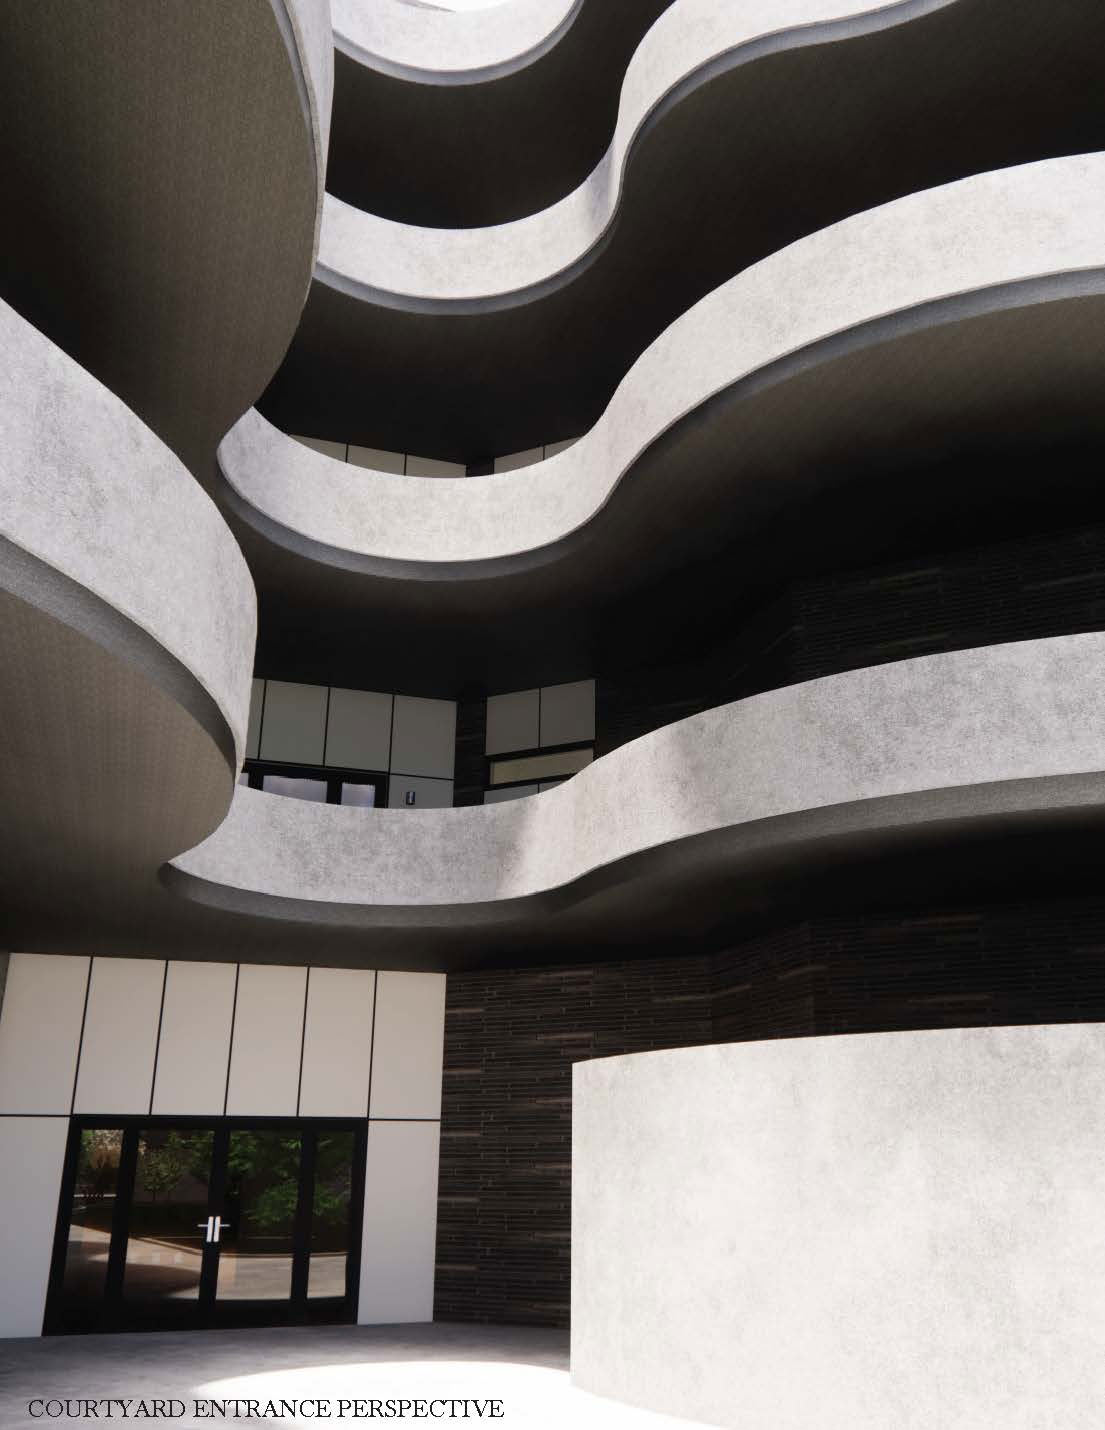 The bottom left of this phot reads &quot;courtyard entrance perspective&quot;. The building is dark gray and consists of light gray balcony railings that weave their way through the building in squiggle shapes. Below the balconies is a glass doorway into the building.